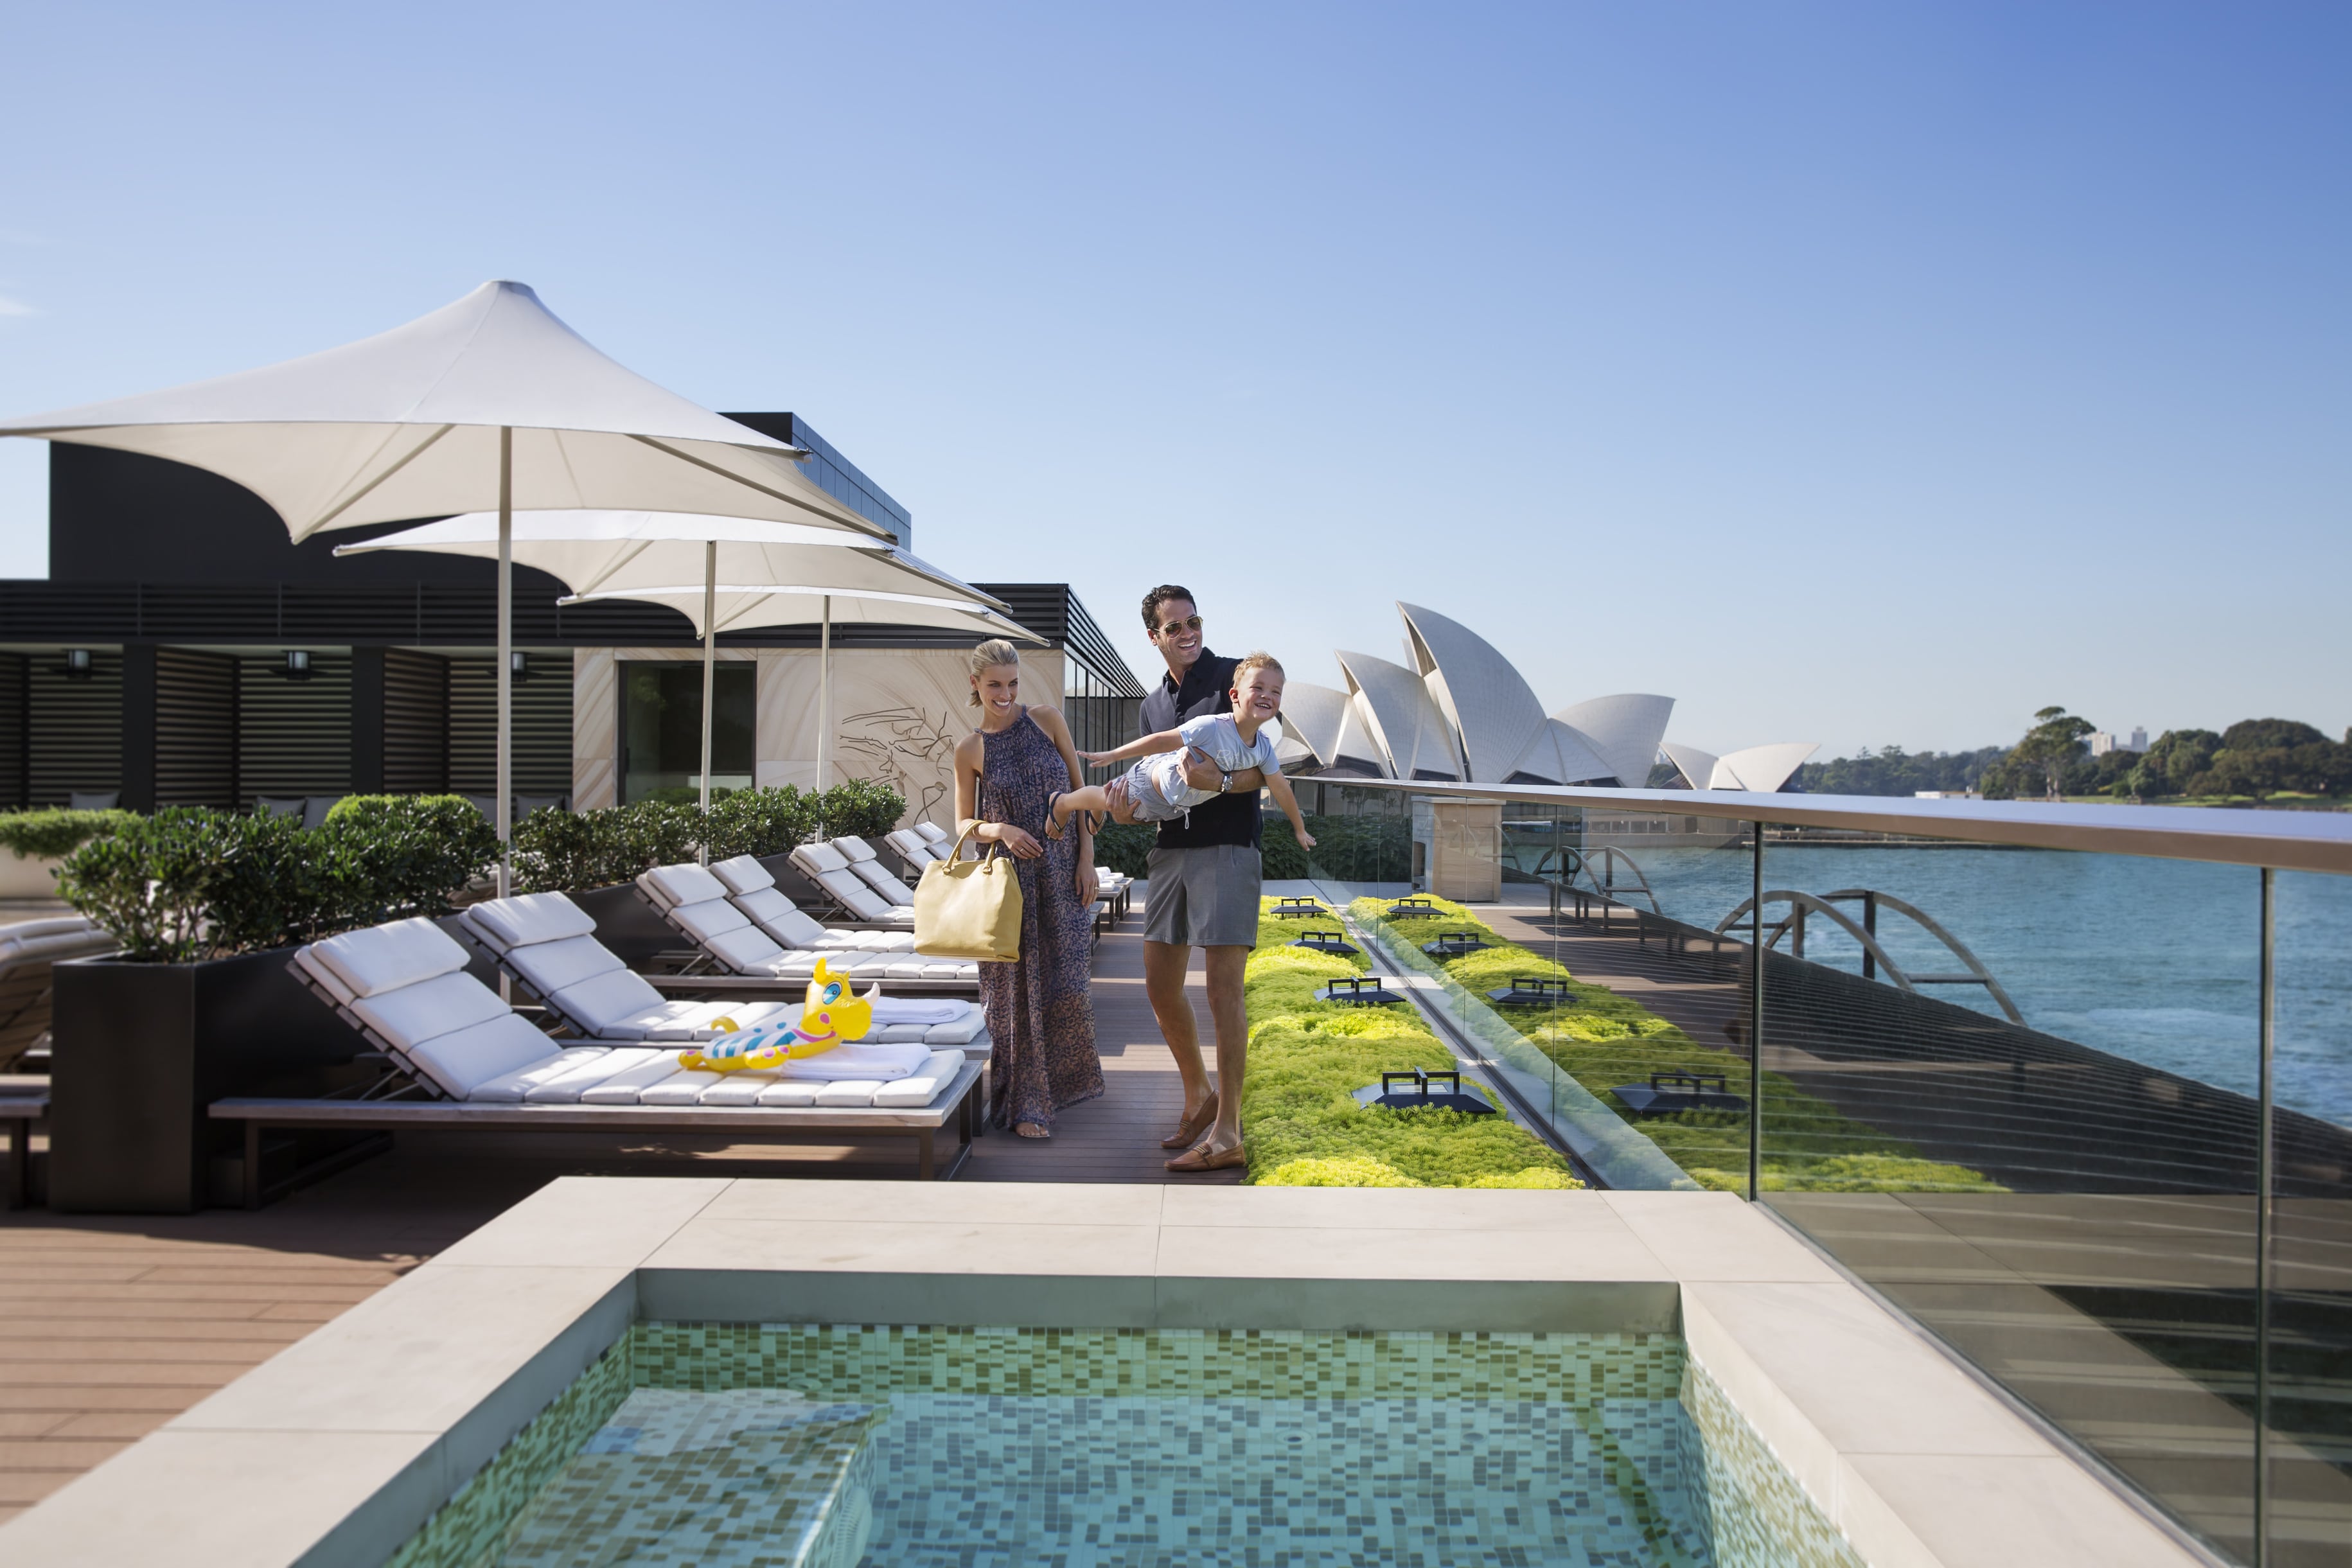 Park Hyatt's rooftop swimming pool with sweeping views of Sydney Harbour